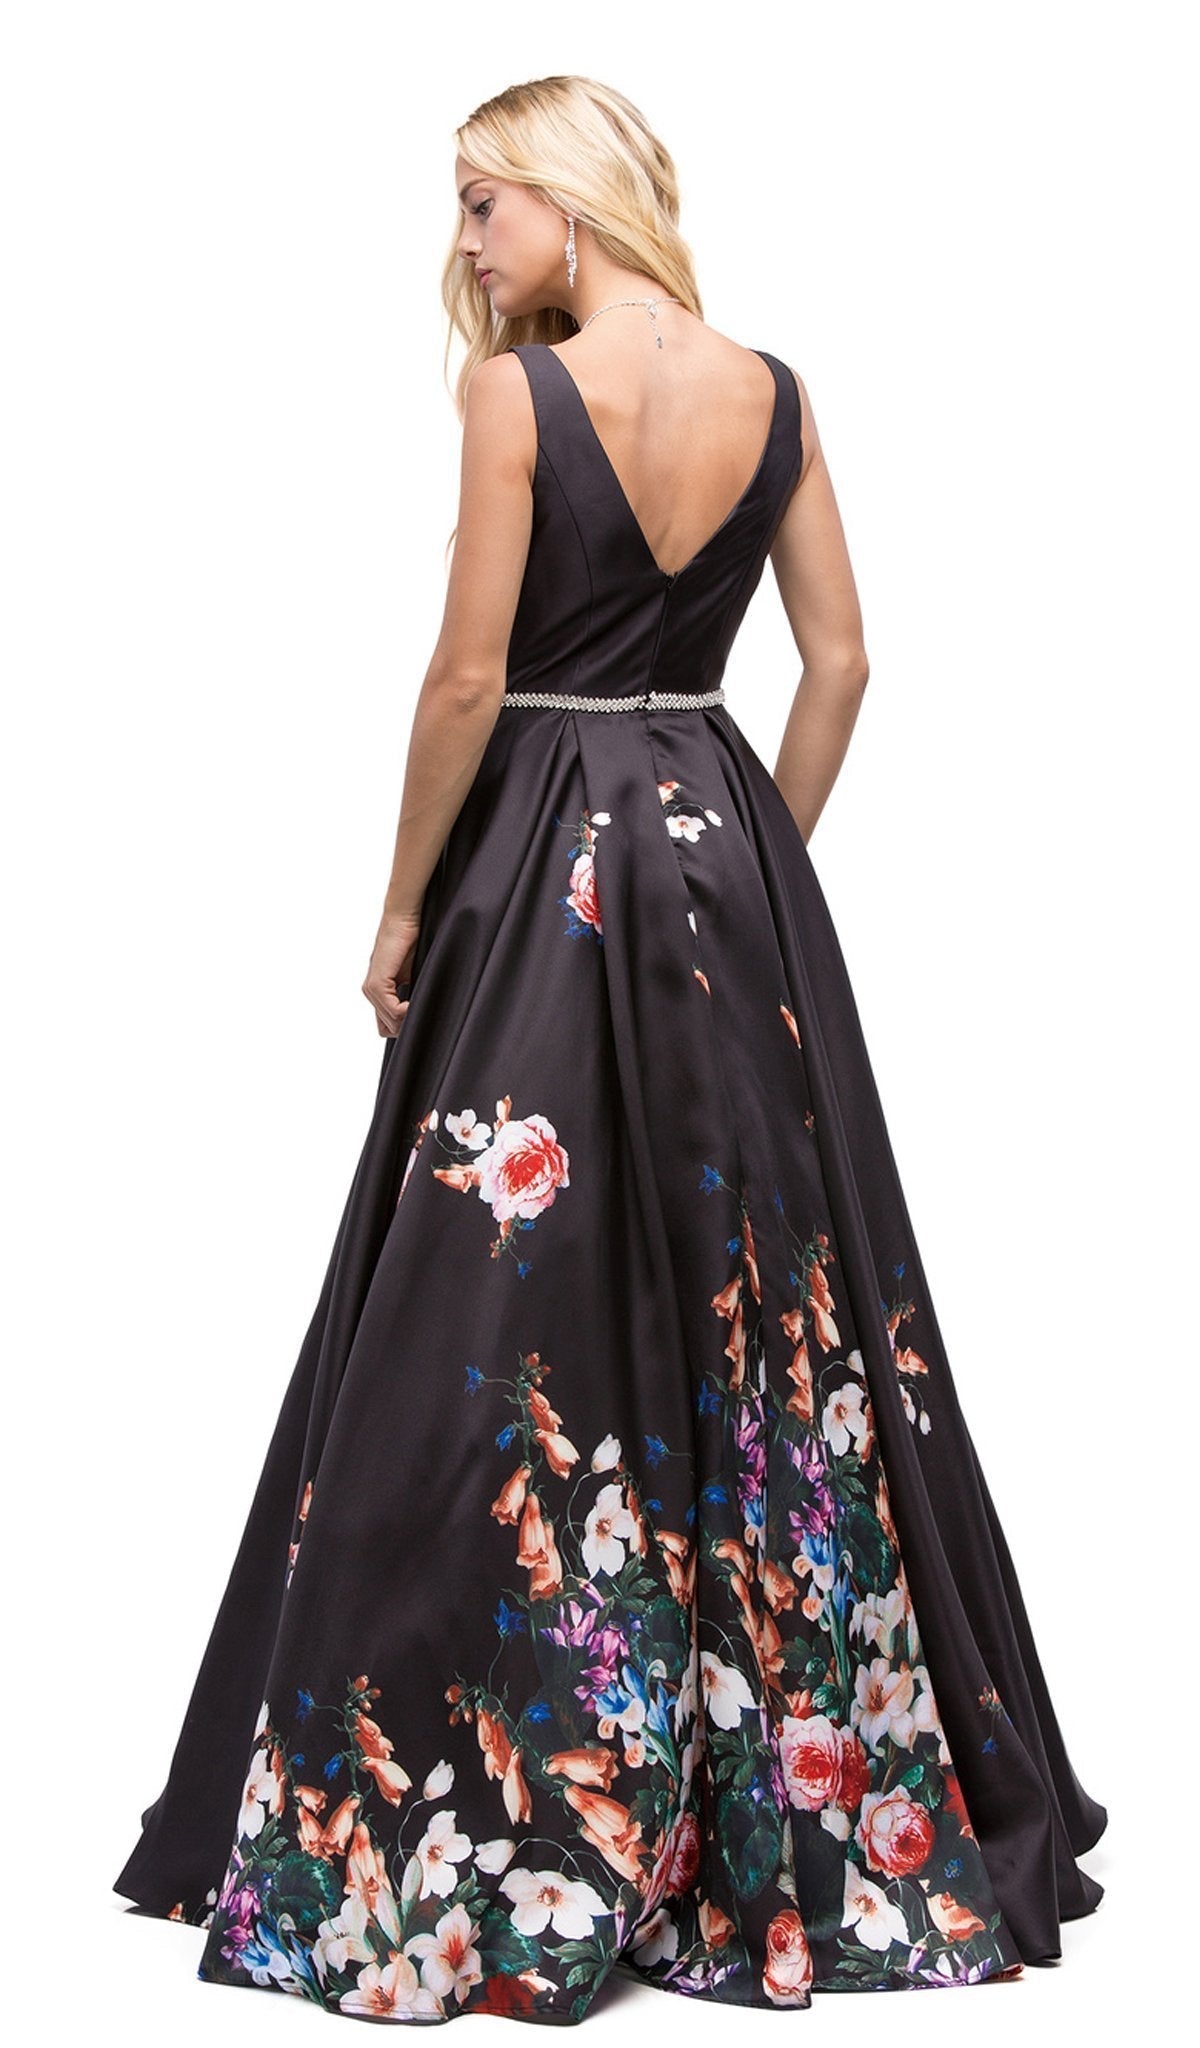 Dancing Queen - 9920 Attractive Long V-Neck Floral Print Prom Dress Special Occasion Dress M / Black/M Print